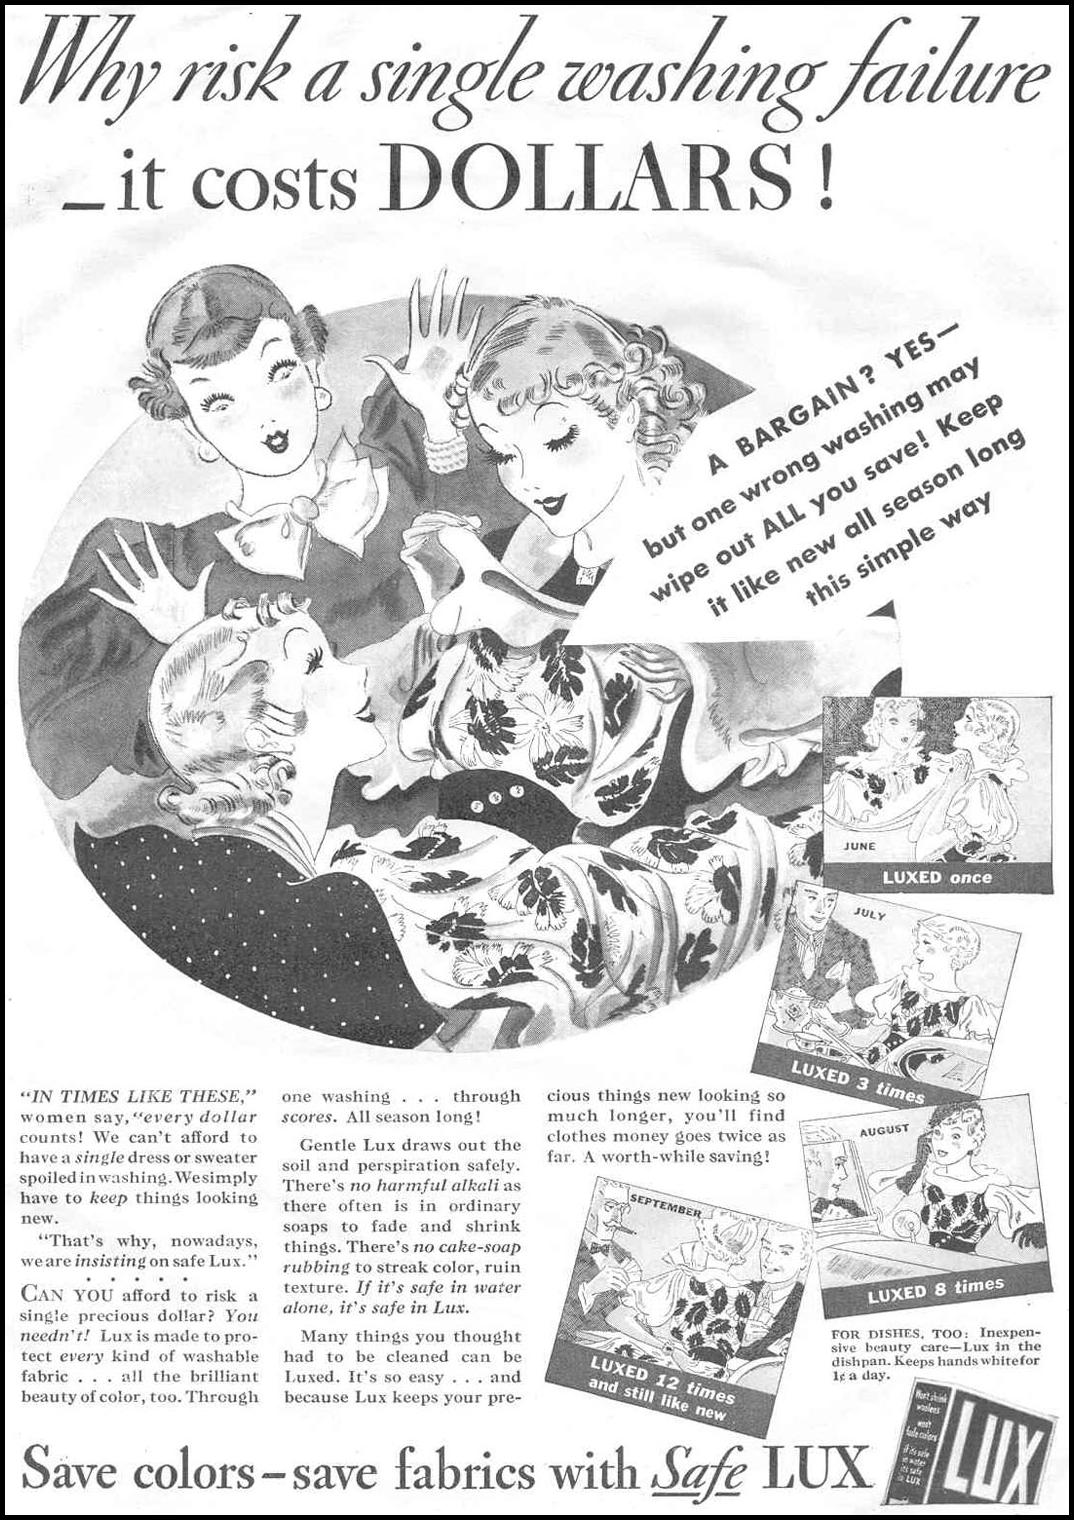 LUX SOAP
GOOD HOUSEKEEPING
06/01/1933
p. 117